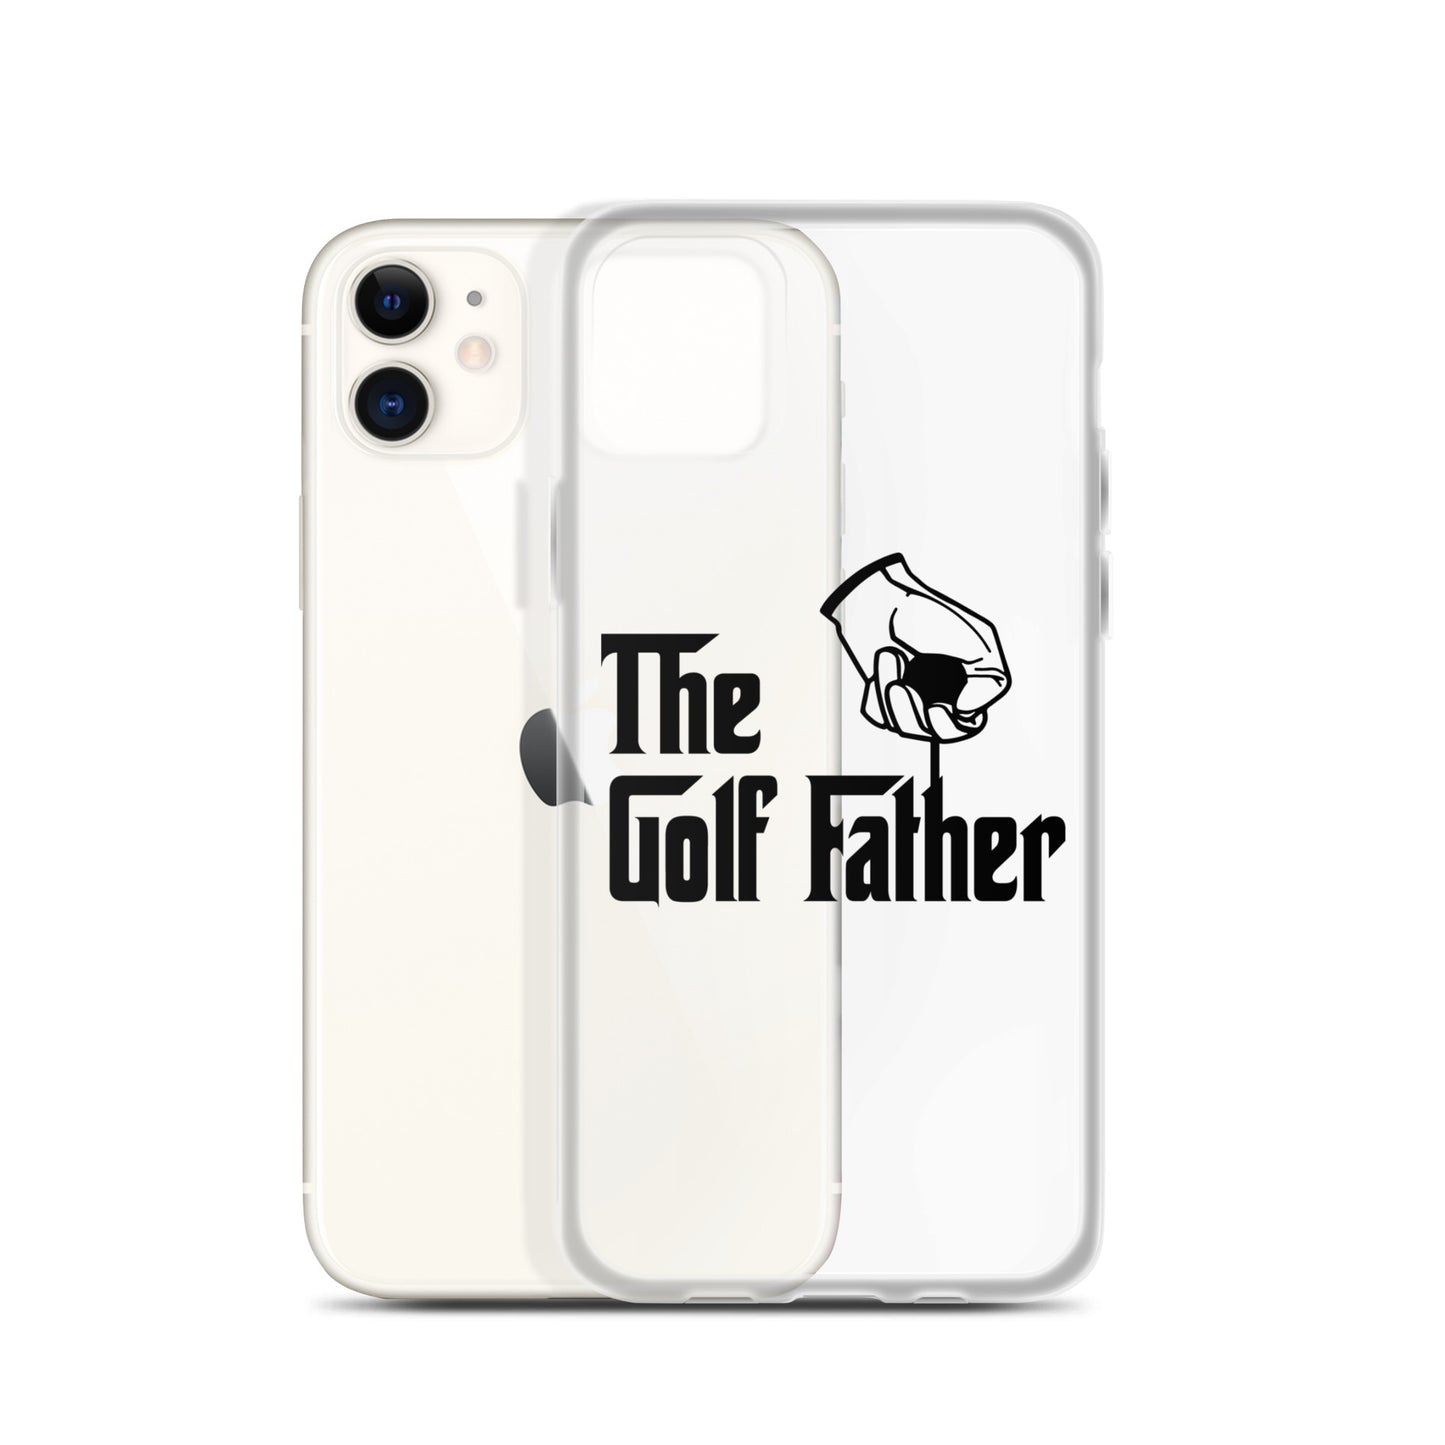 The Golf Father iPhone Case